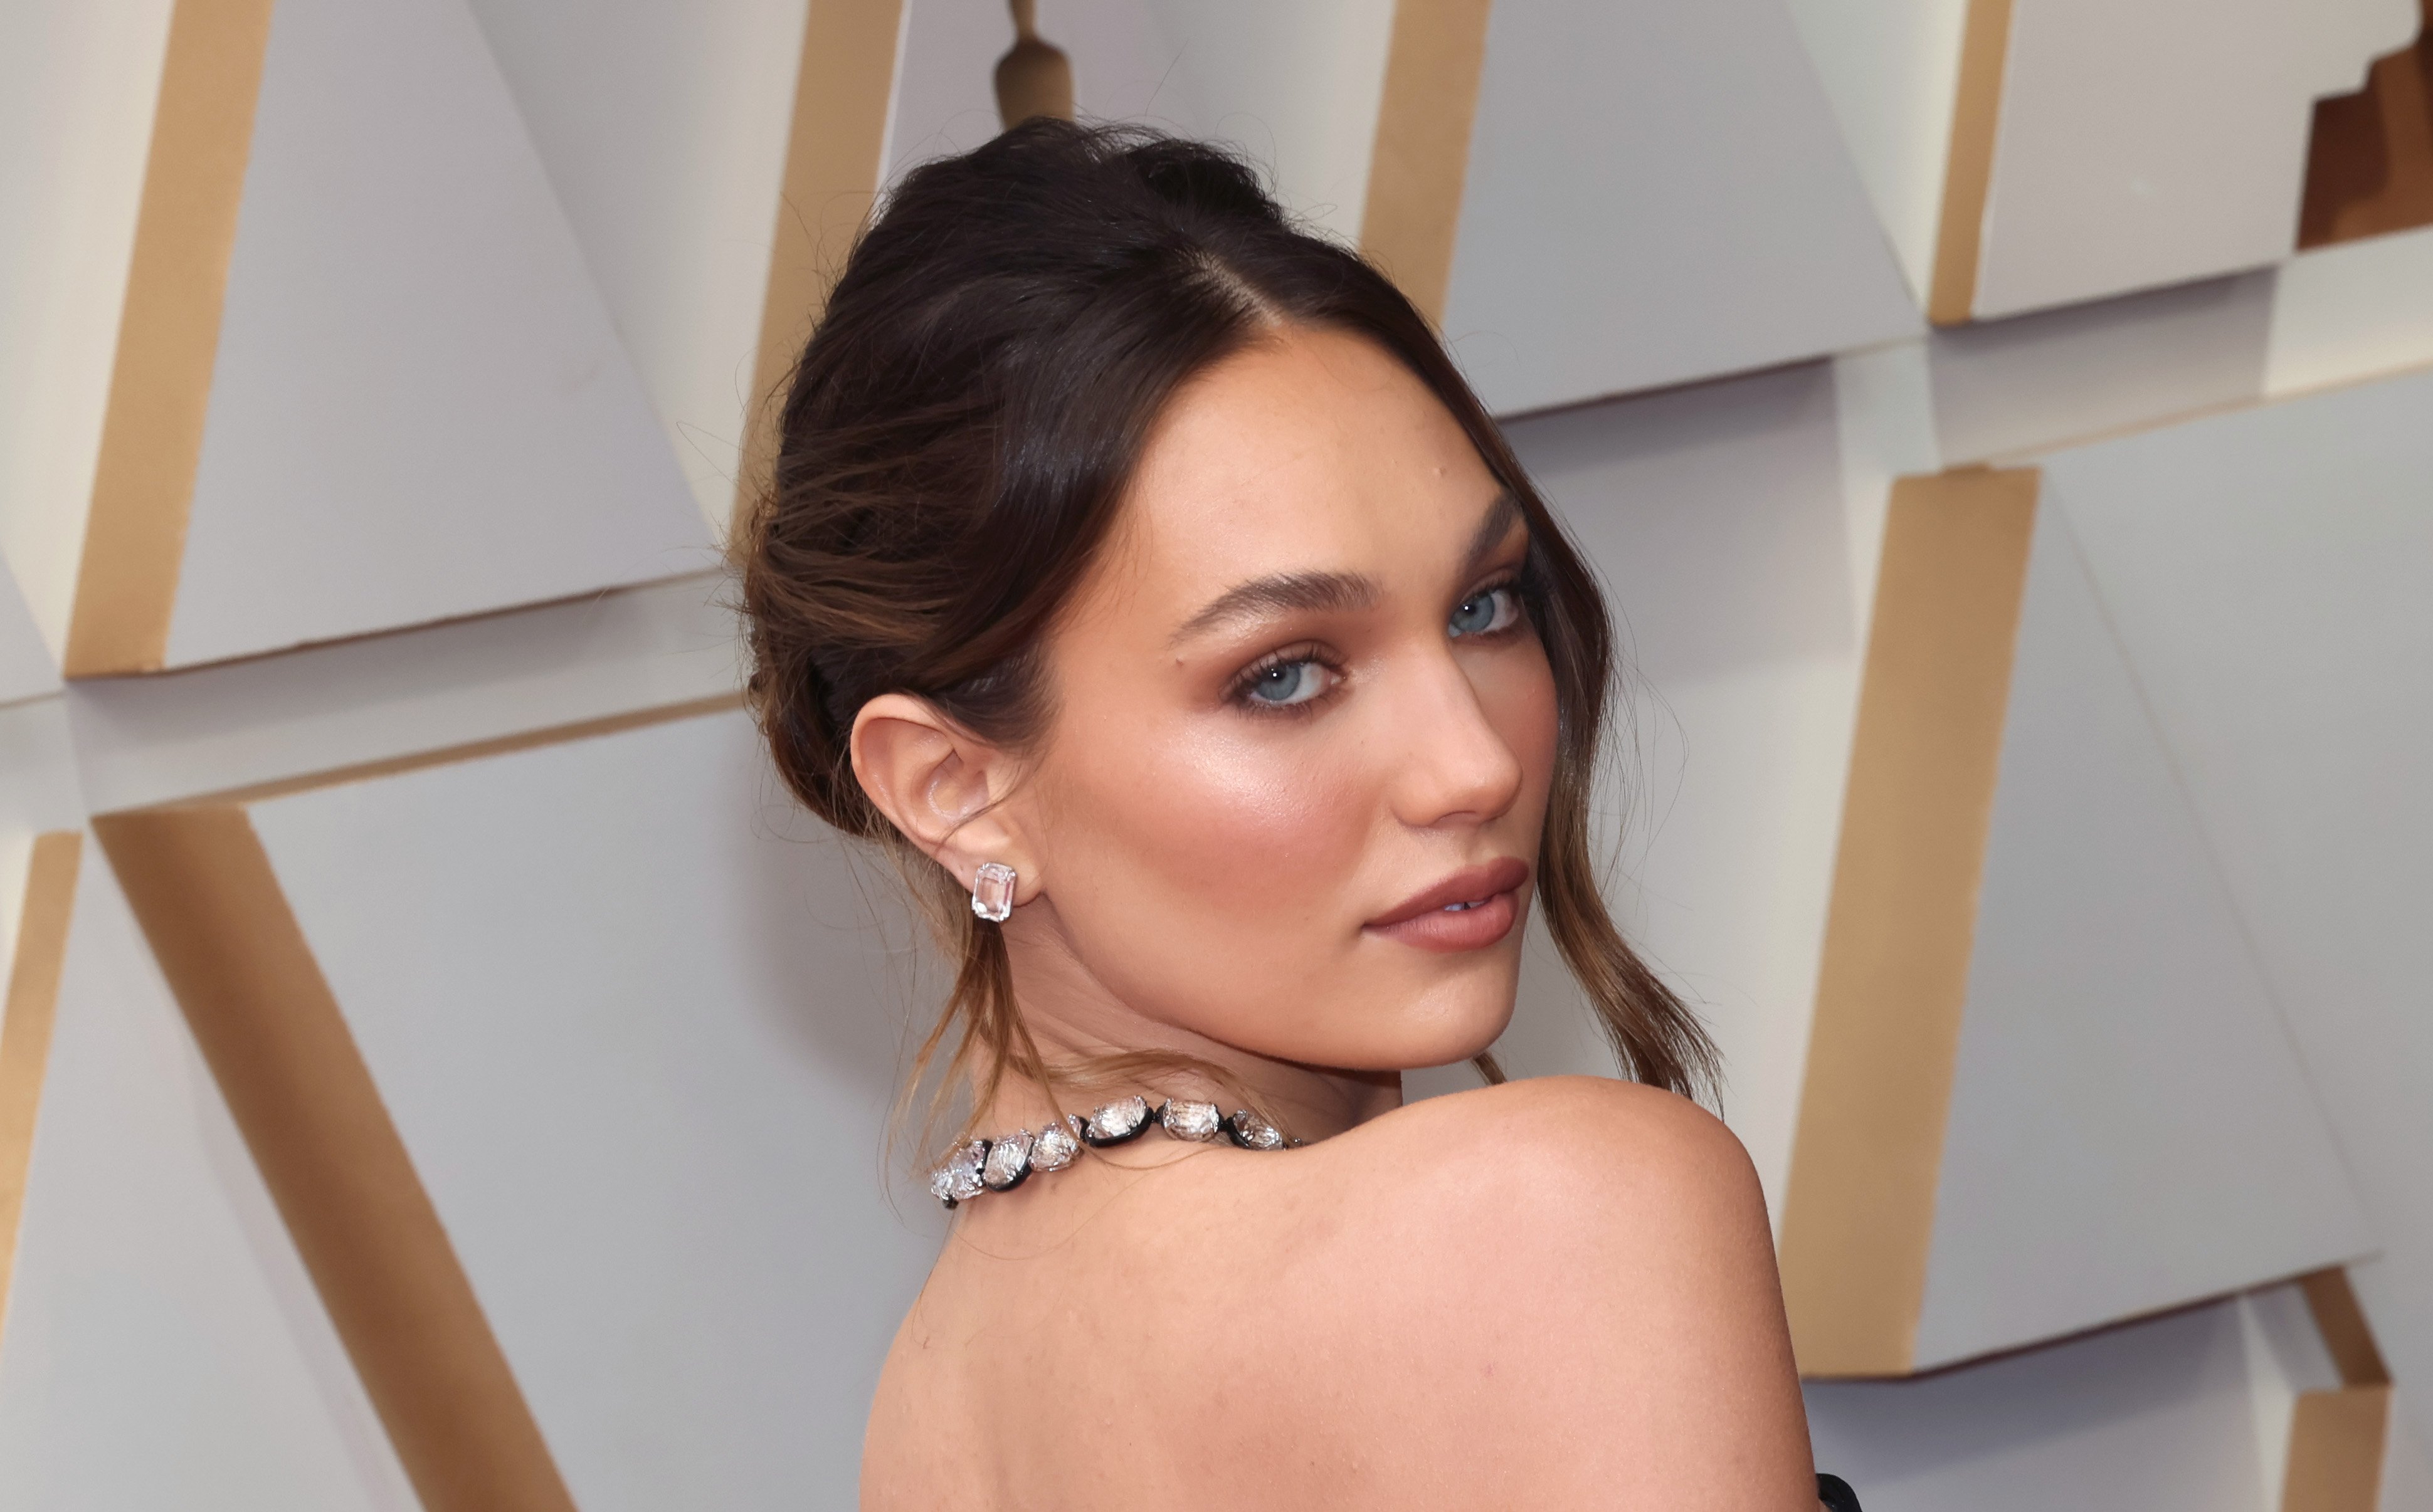  Maddie Ziegler attends the 94th Annual Academy Awards at Hollywood and Highland on March 27, 2022 in Hollywood, California. | Source: Getty Images